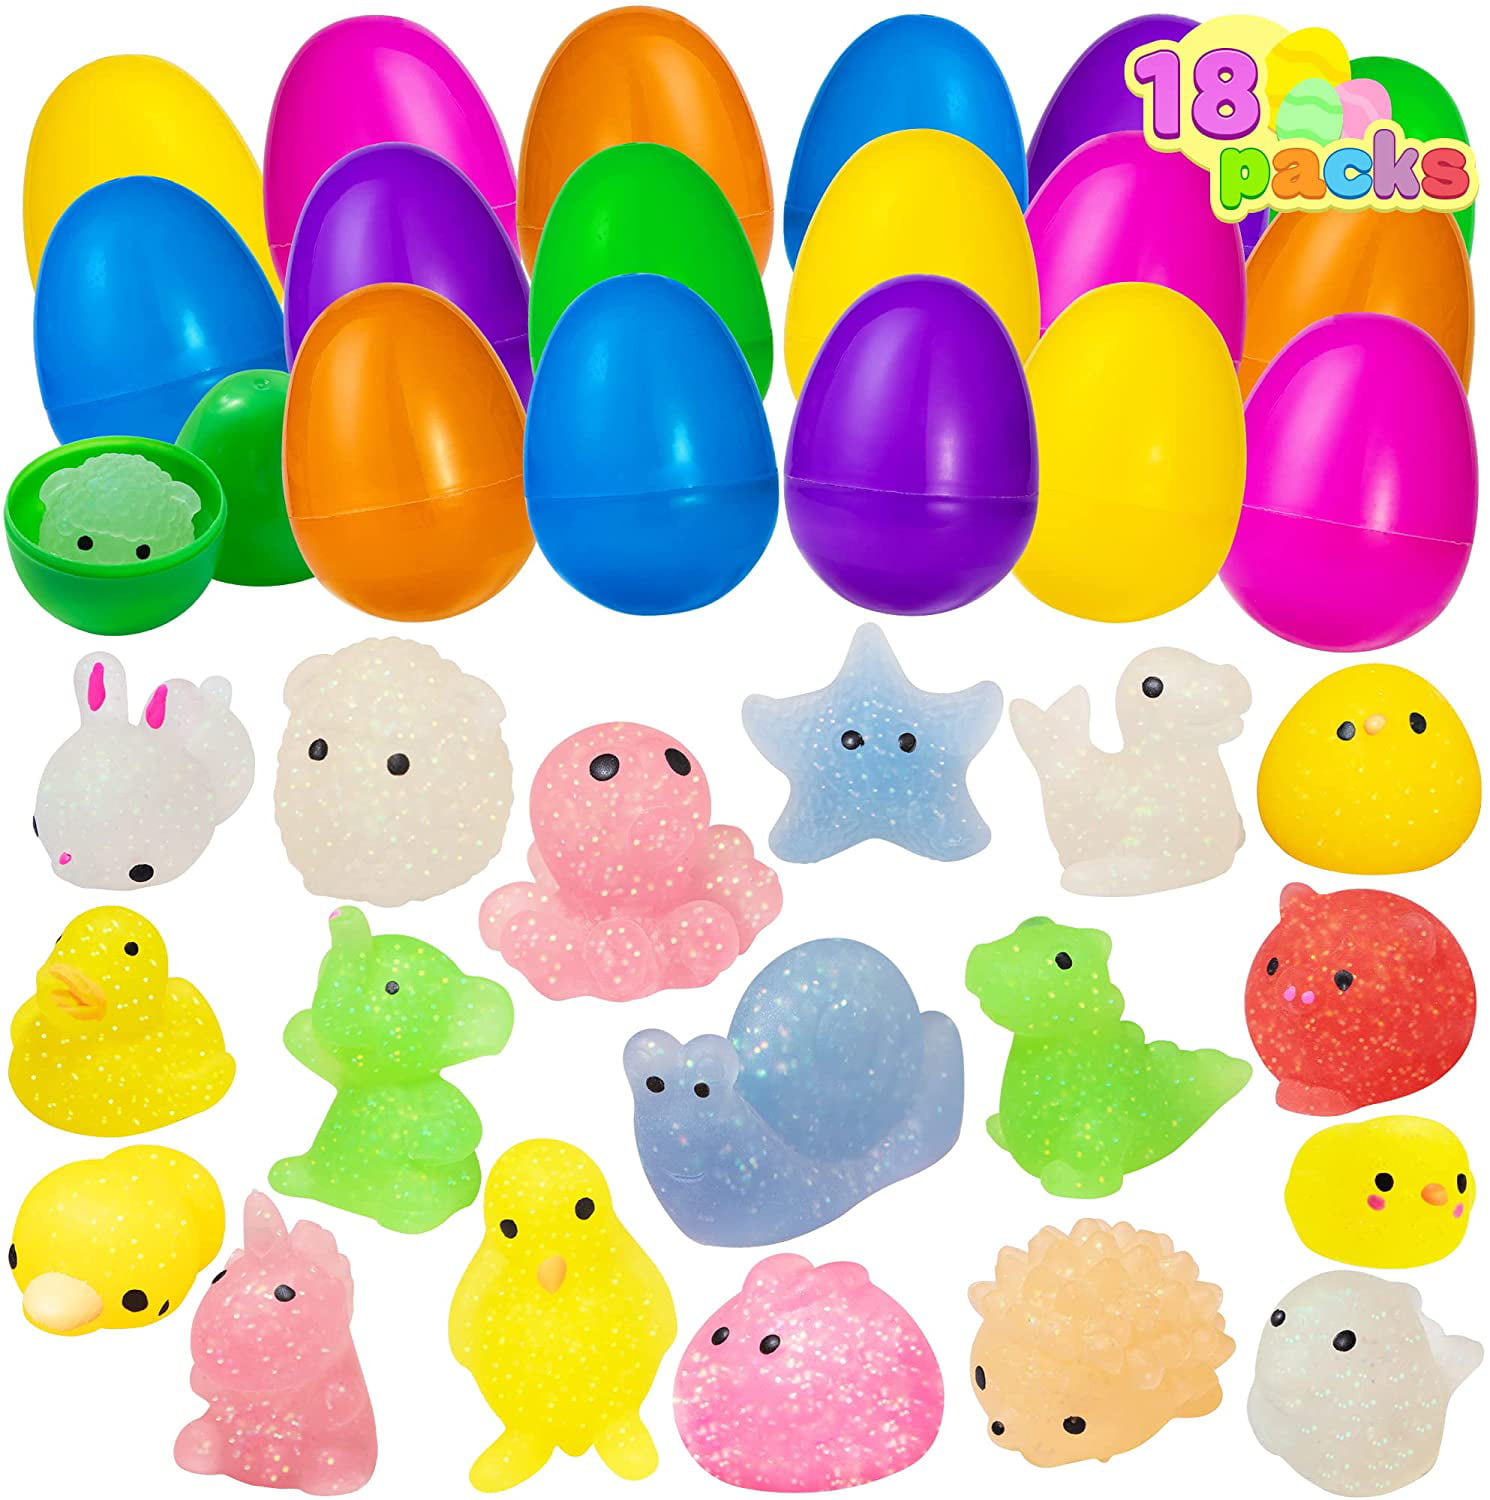 Classroom Prize Supplies Easter Eggs Hunt Cute Chicken Mochi Kawaii Mochi Stress Reliever Squishies for Easter Theme Party Favor 12 Pcs Prefilled Easter Eggs with Toys Easter Basket Stuffers 